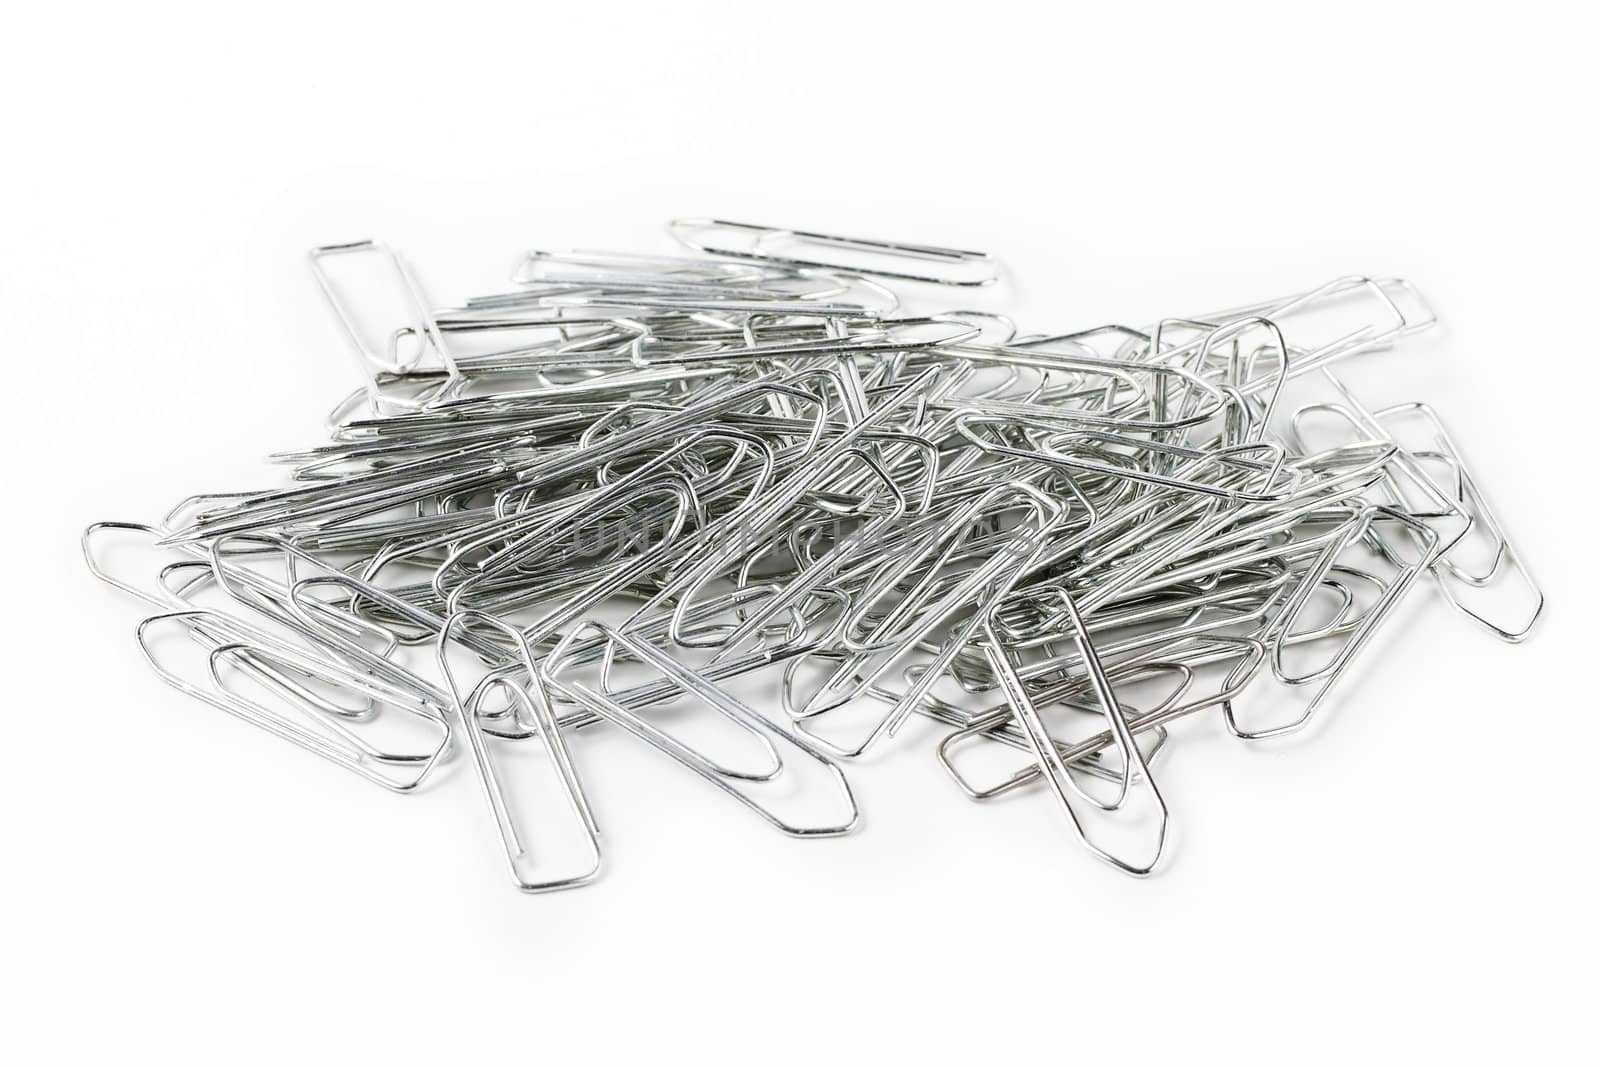 lot of paper clips by RobStark